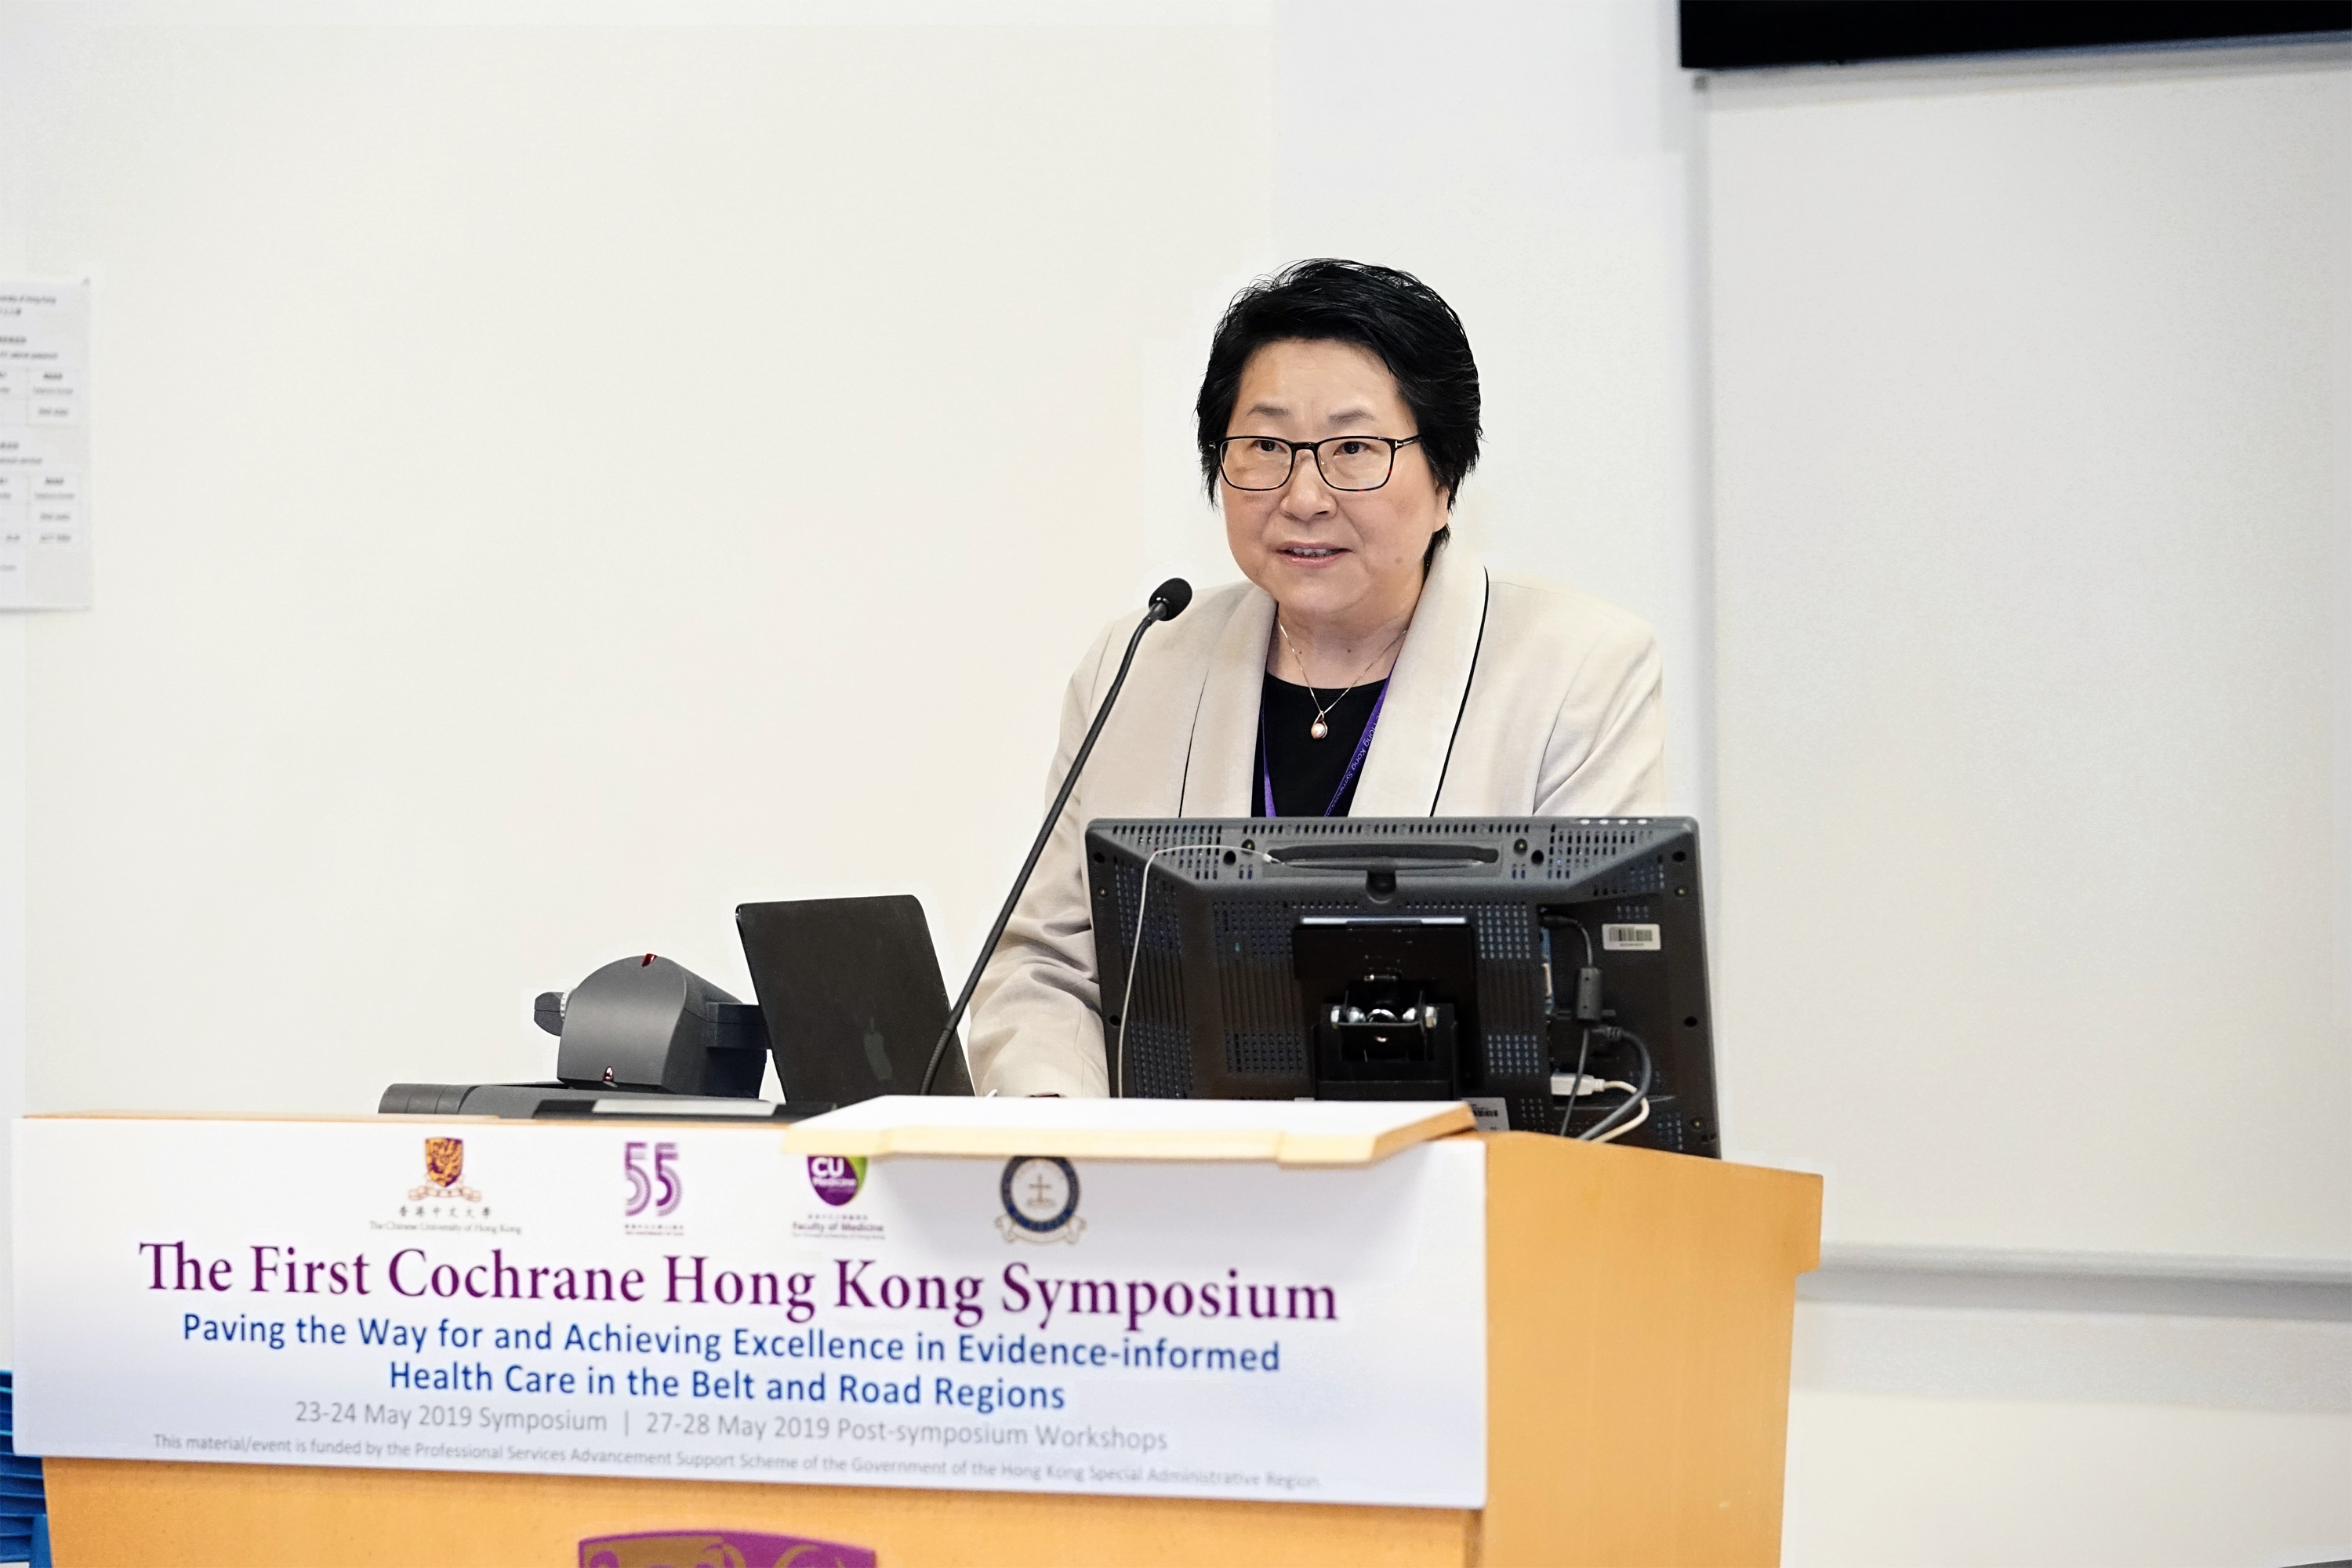 Professor CHAIR Sek Ying, Director and Professor of The Nethersole School of Nursing of Faculty of Medicine at CUHK says the School is committed to collaborating closely with Cochrane centres around the world towards a shared vision for better health.